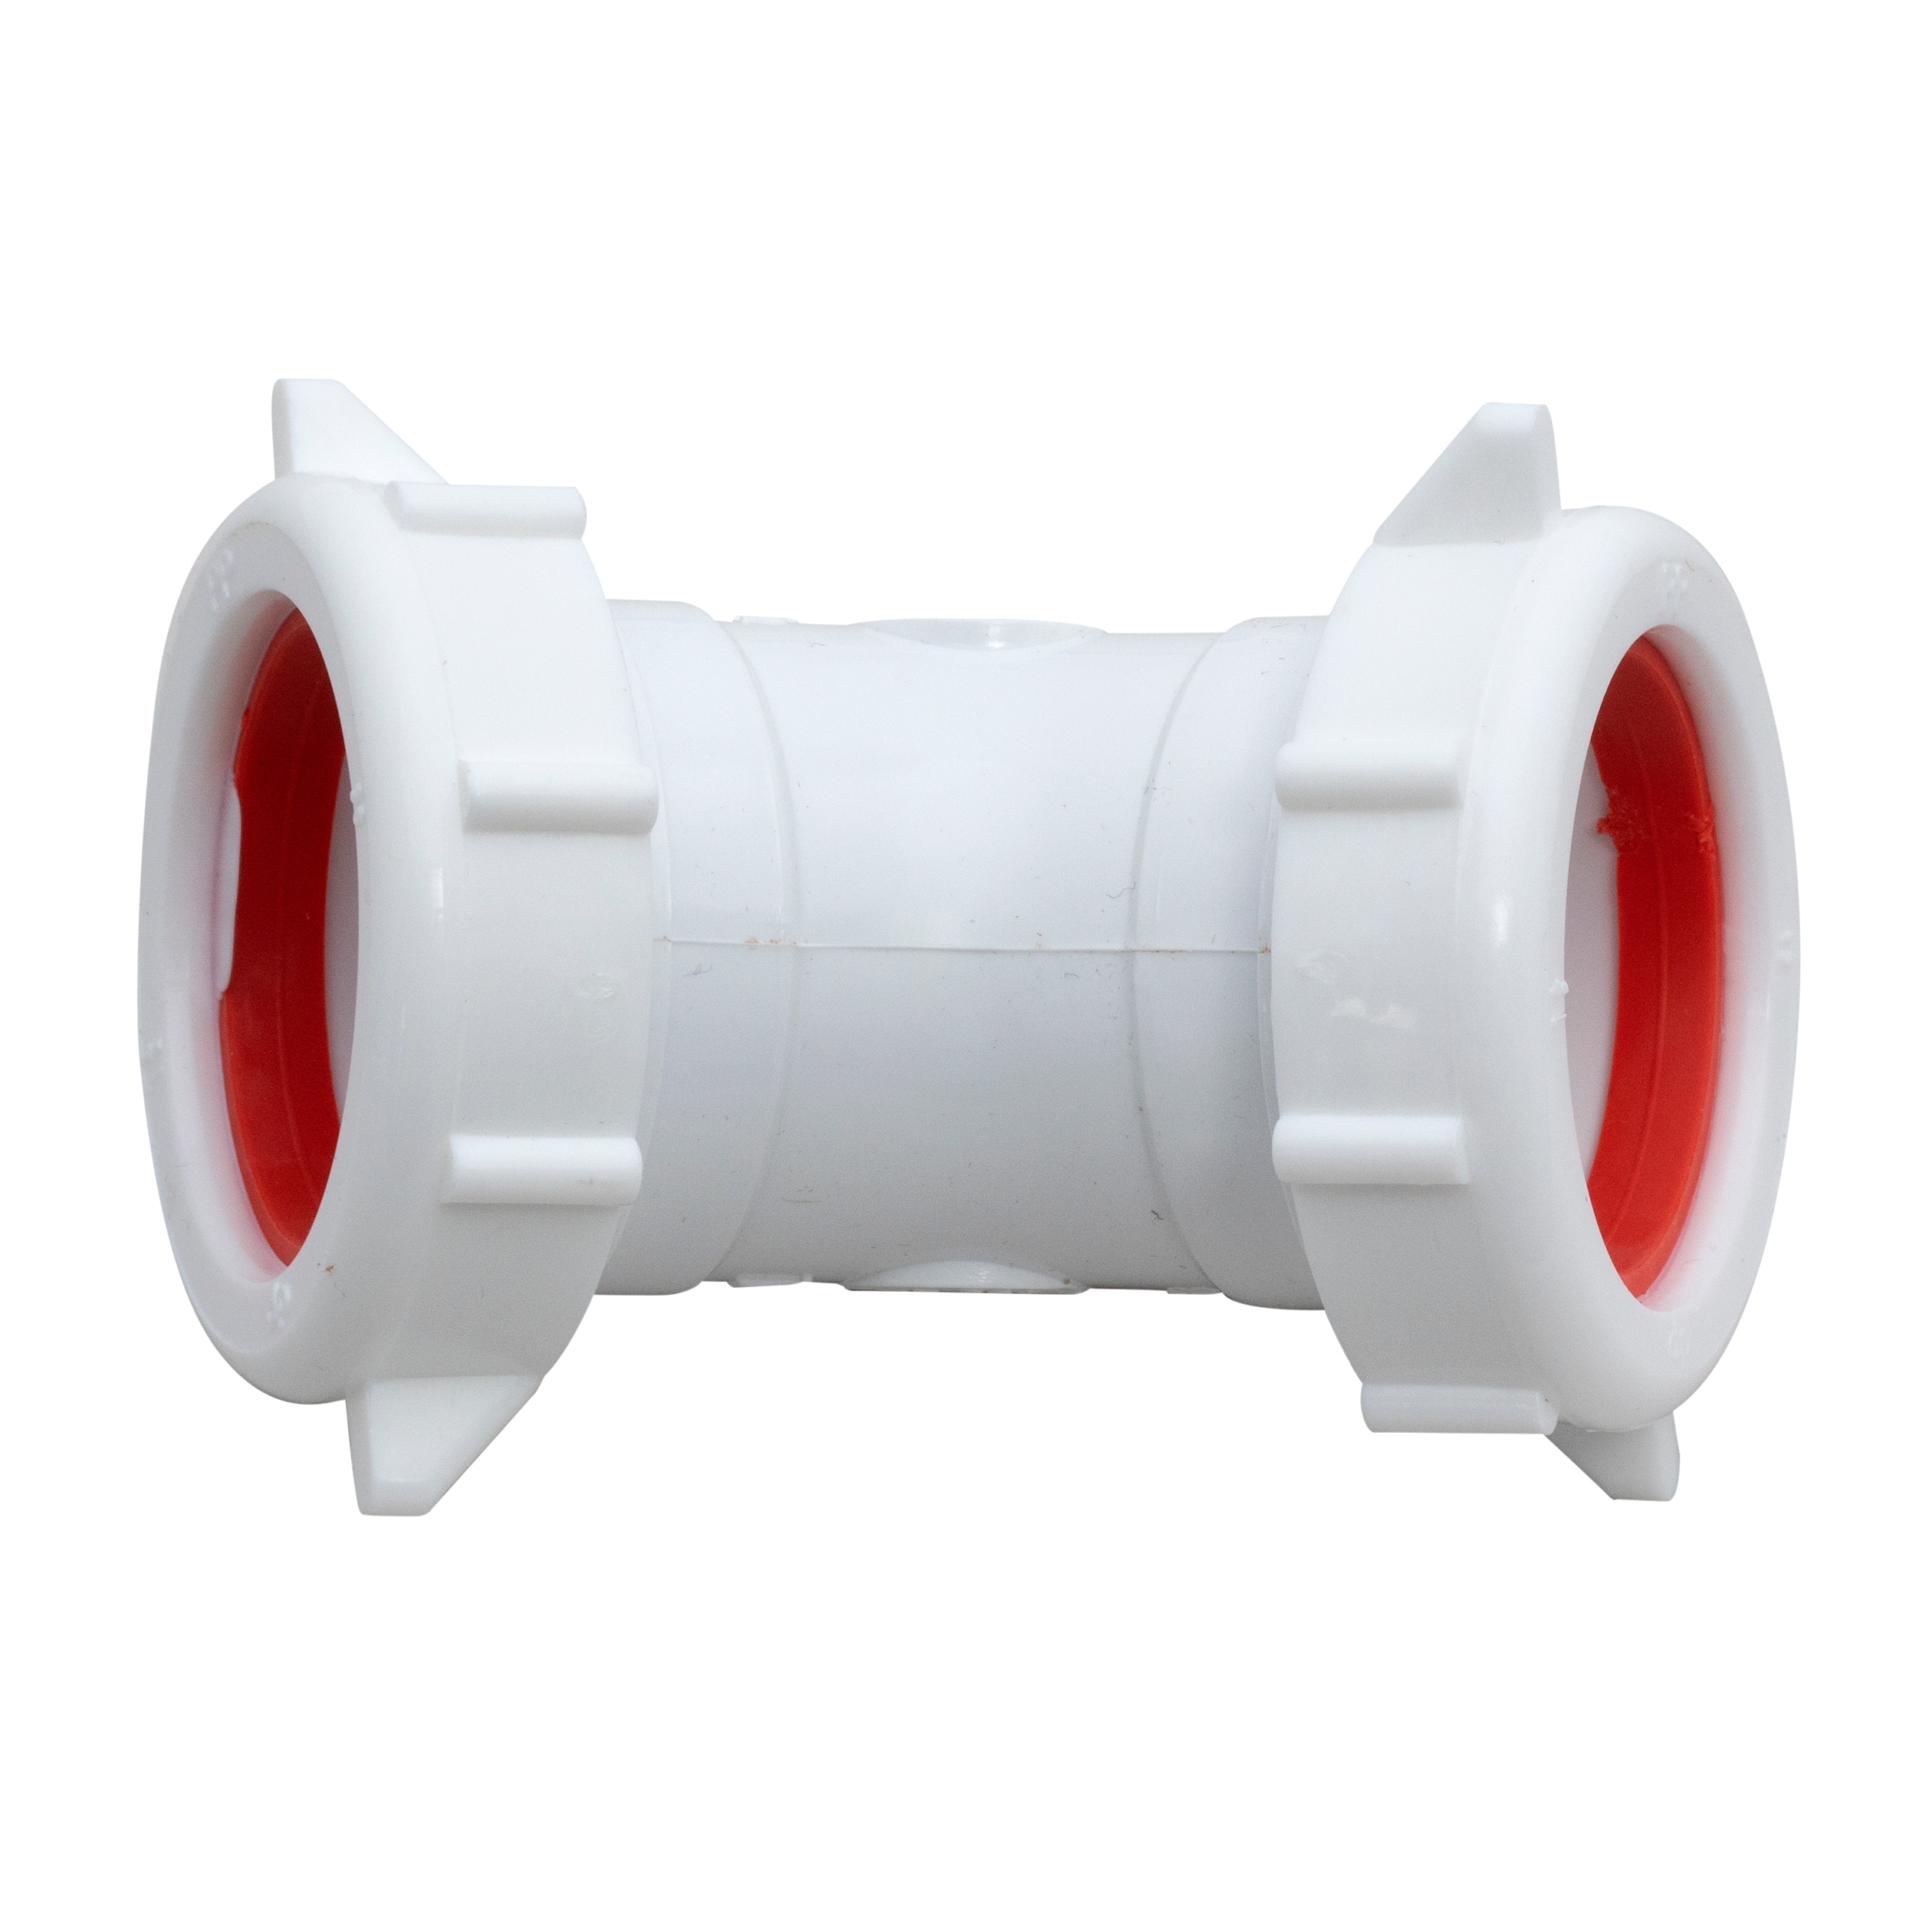 Keeney 1-1/2-in PVC P-trap in the Under Sink Plumbing department at